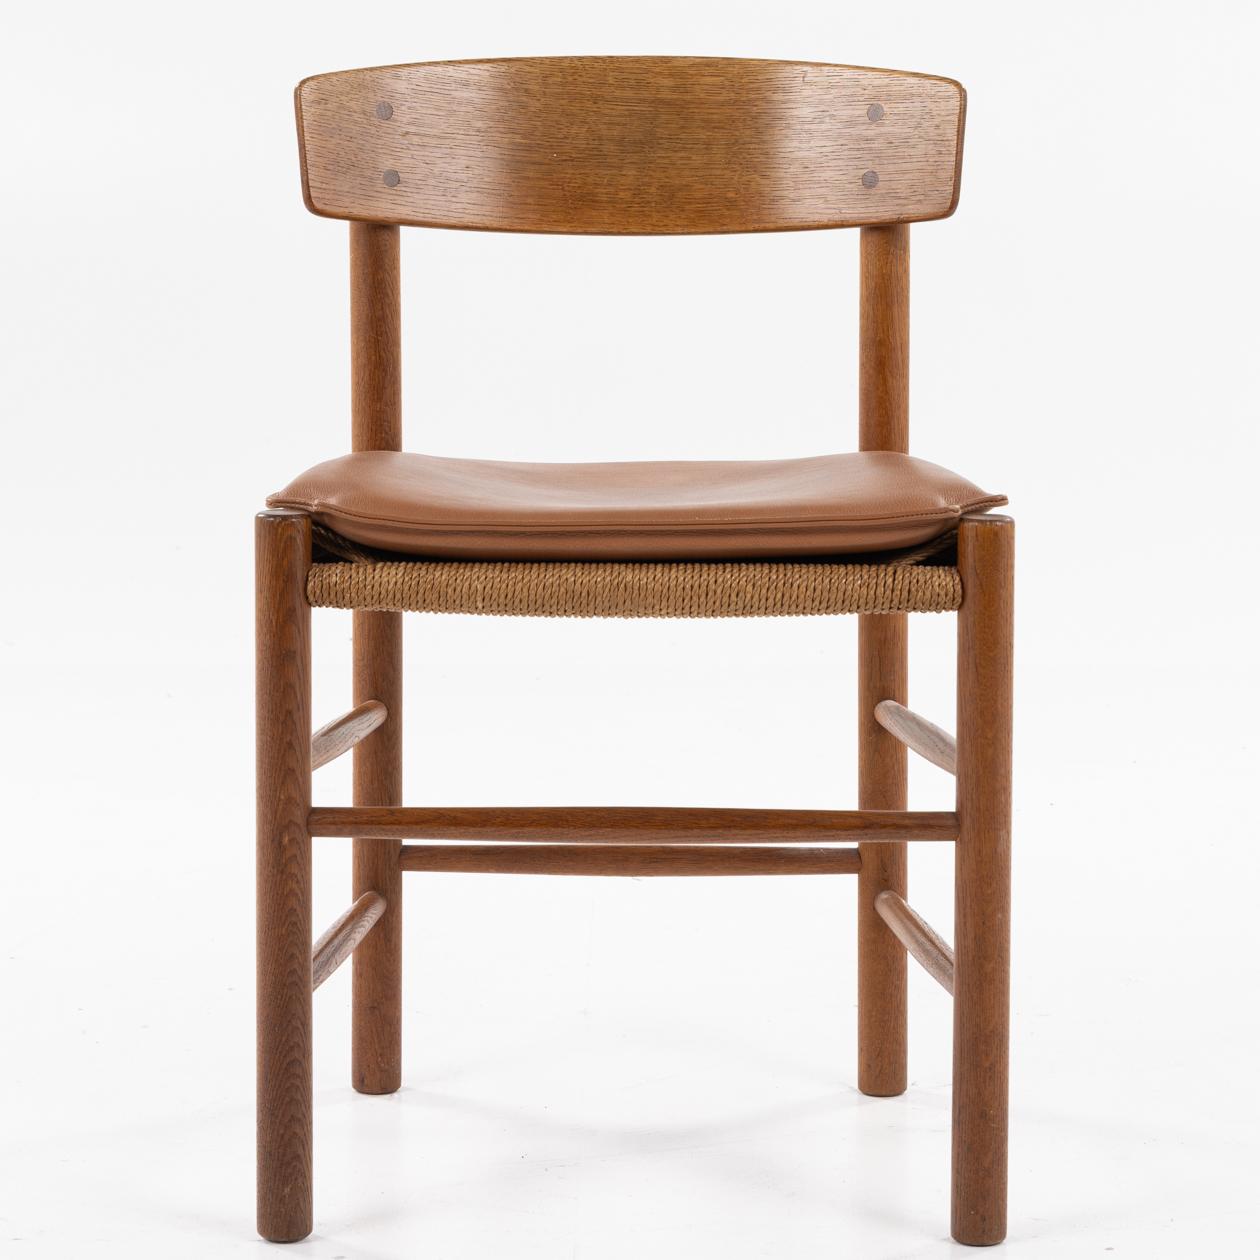 Set of four J 39 - Dining chairs in patinated oak, papercord and leather cushion. Designed 1947. Børge Mogensen / FDB